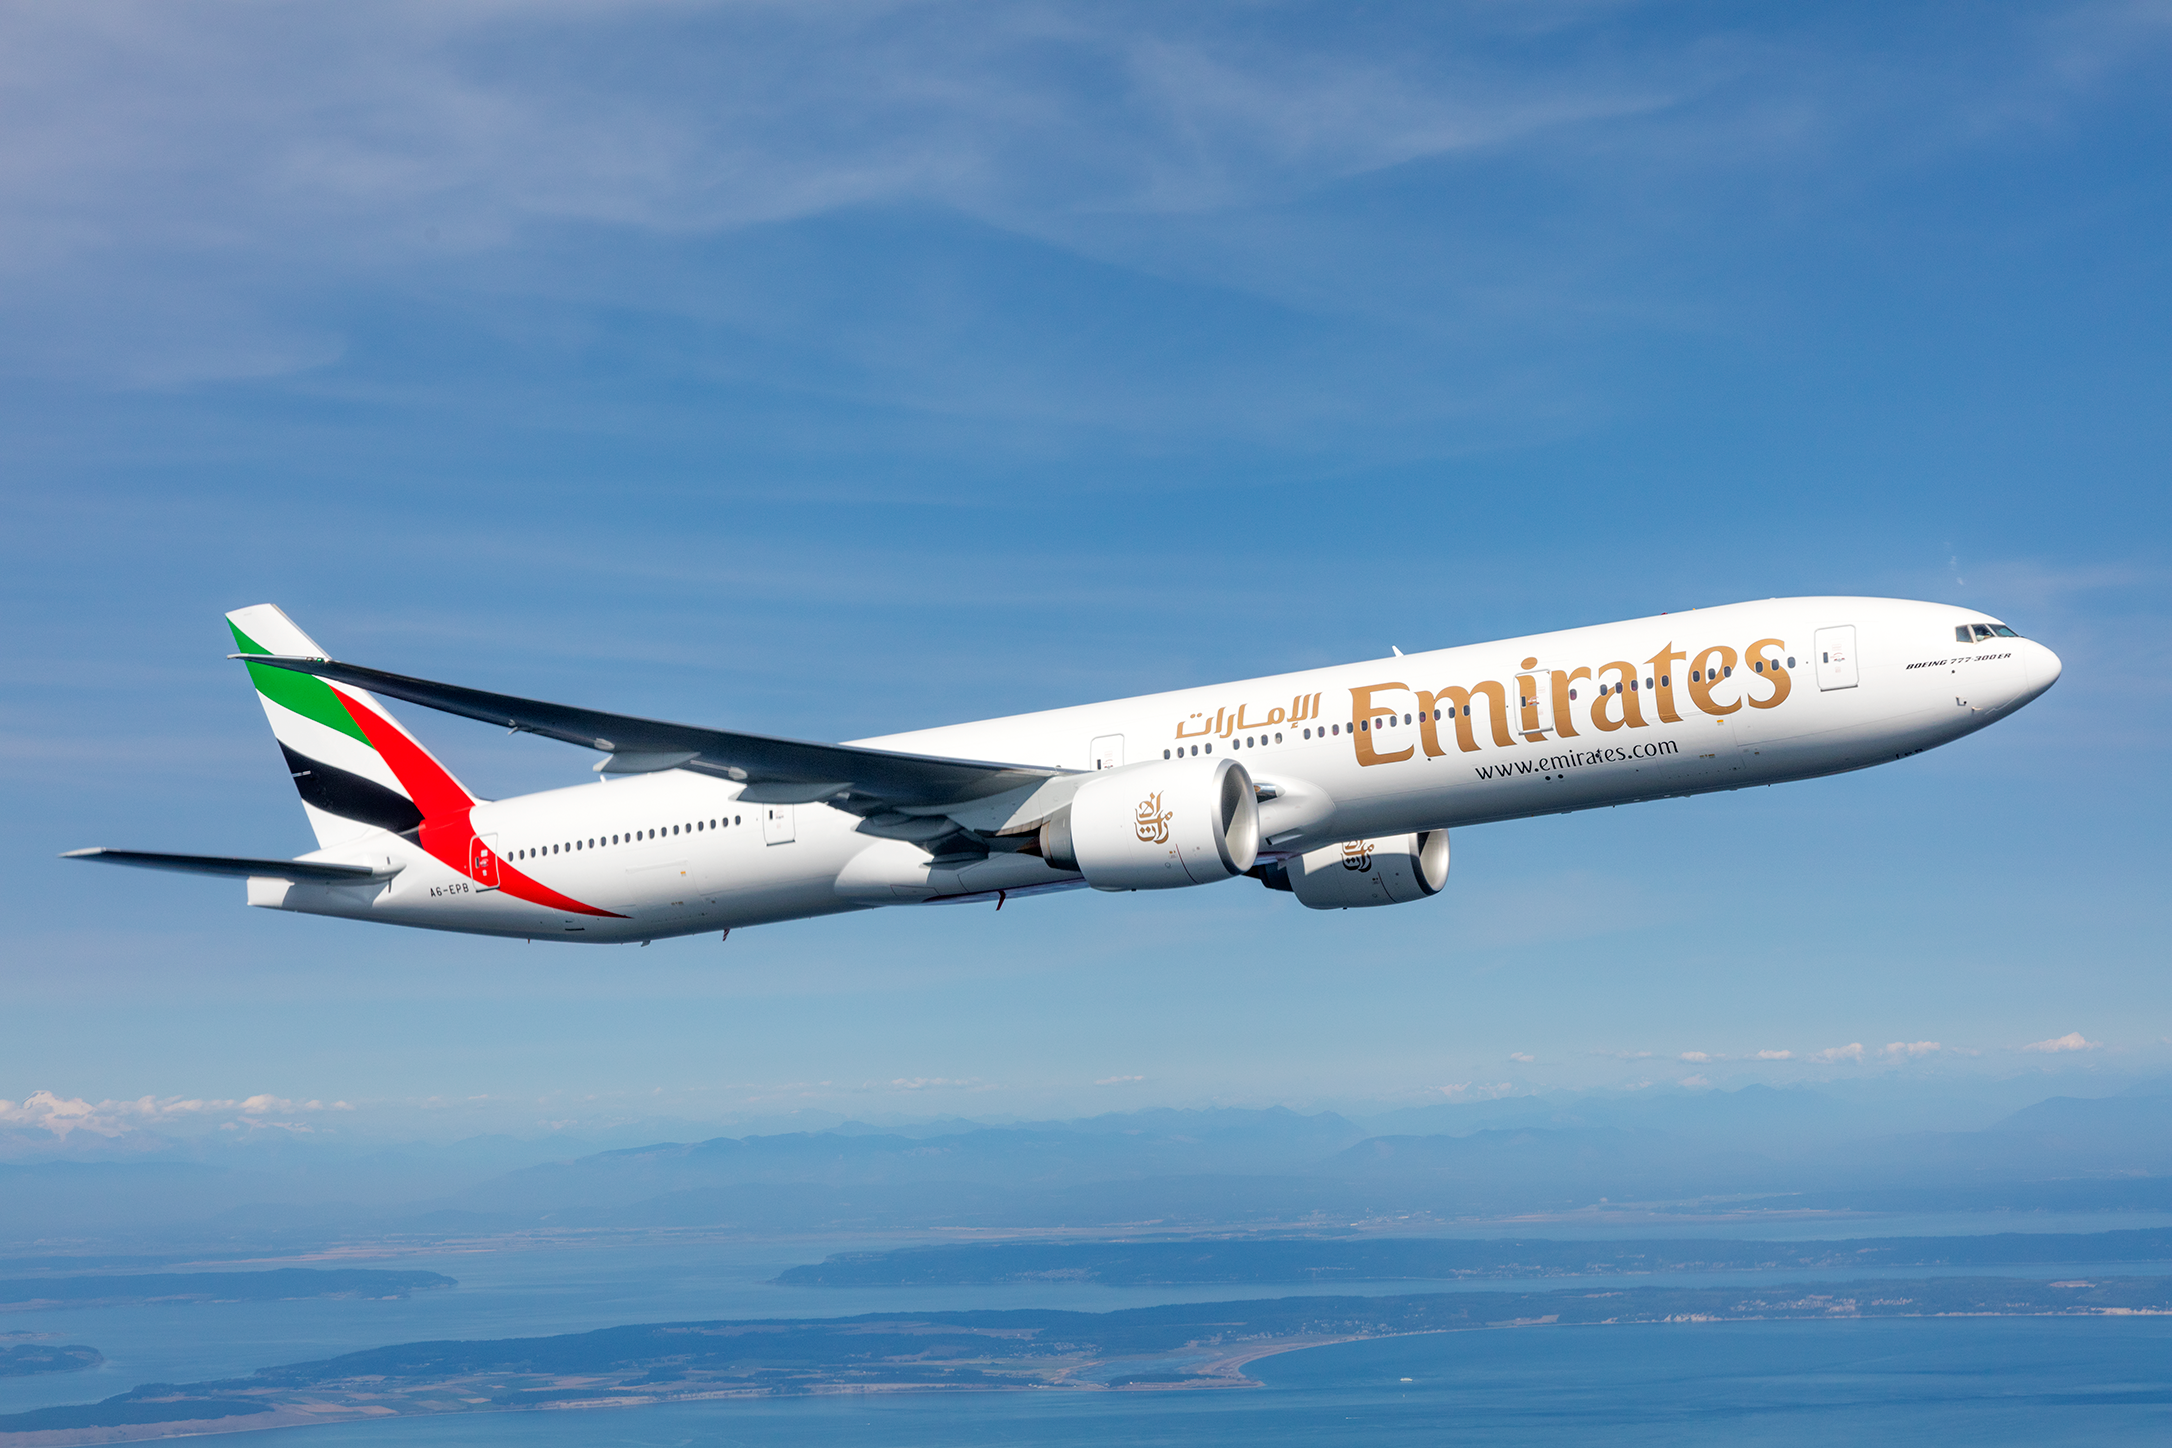 Emirates Returns US$ 1.4 Billion to Customers in Refunds